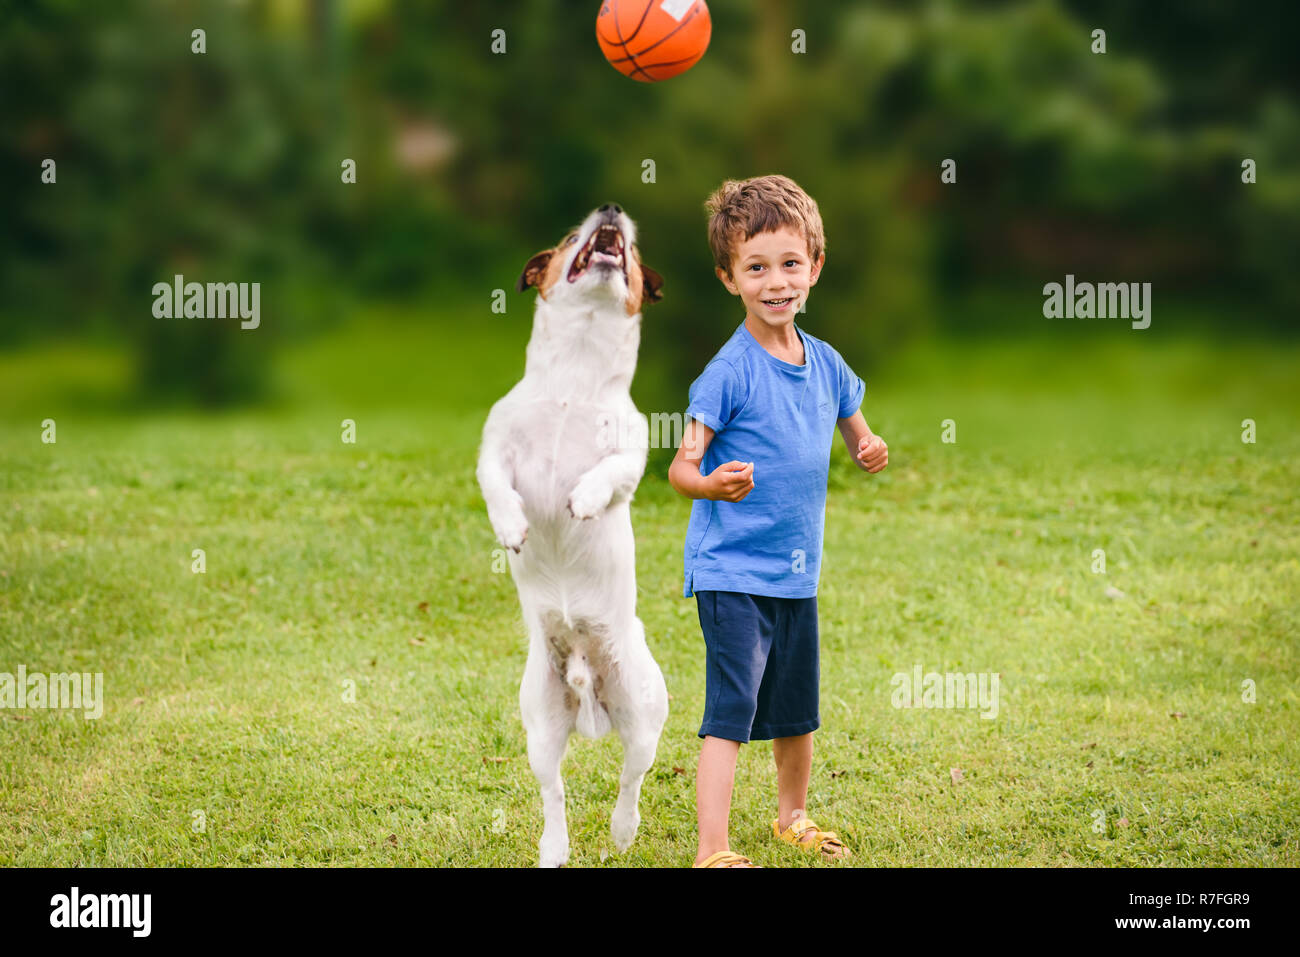 Two friends boy kid and his dog playing with basketball ball at backyard lawn Stock Photo